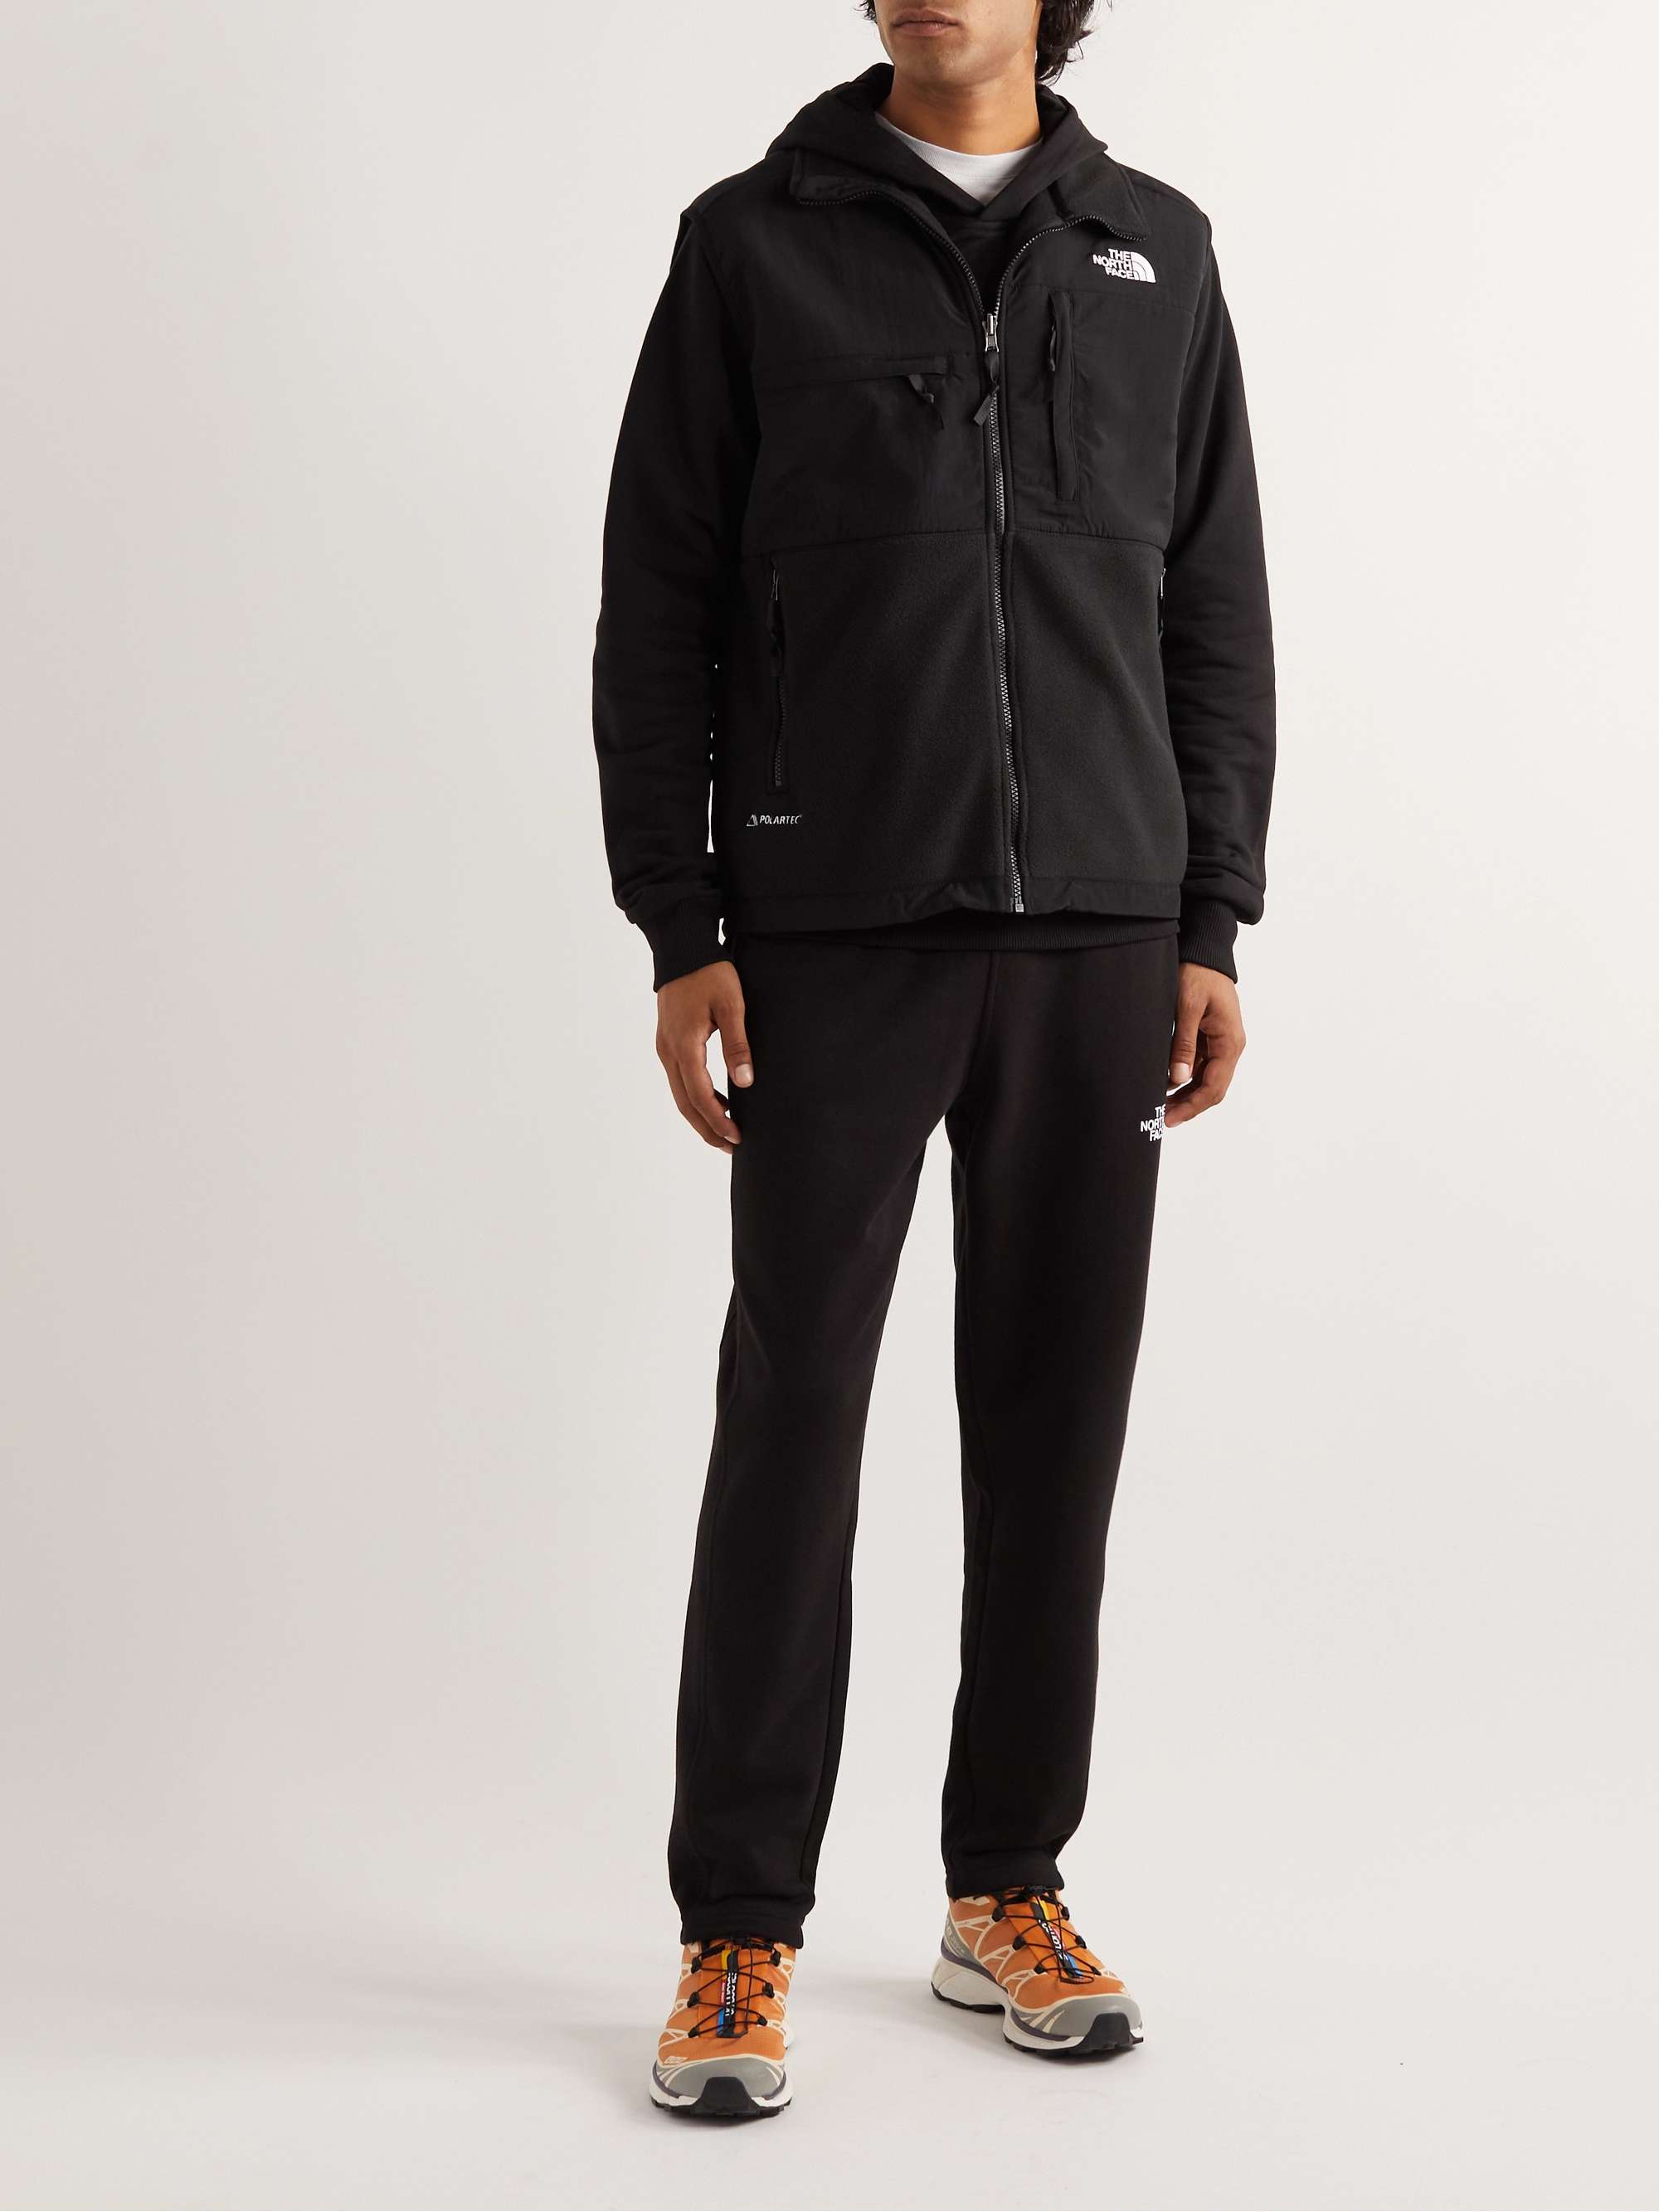 THE NORTH FACE Denali Logo-Embroidered Shell and Fleece Gilet | MR PORTER